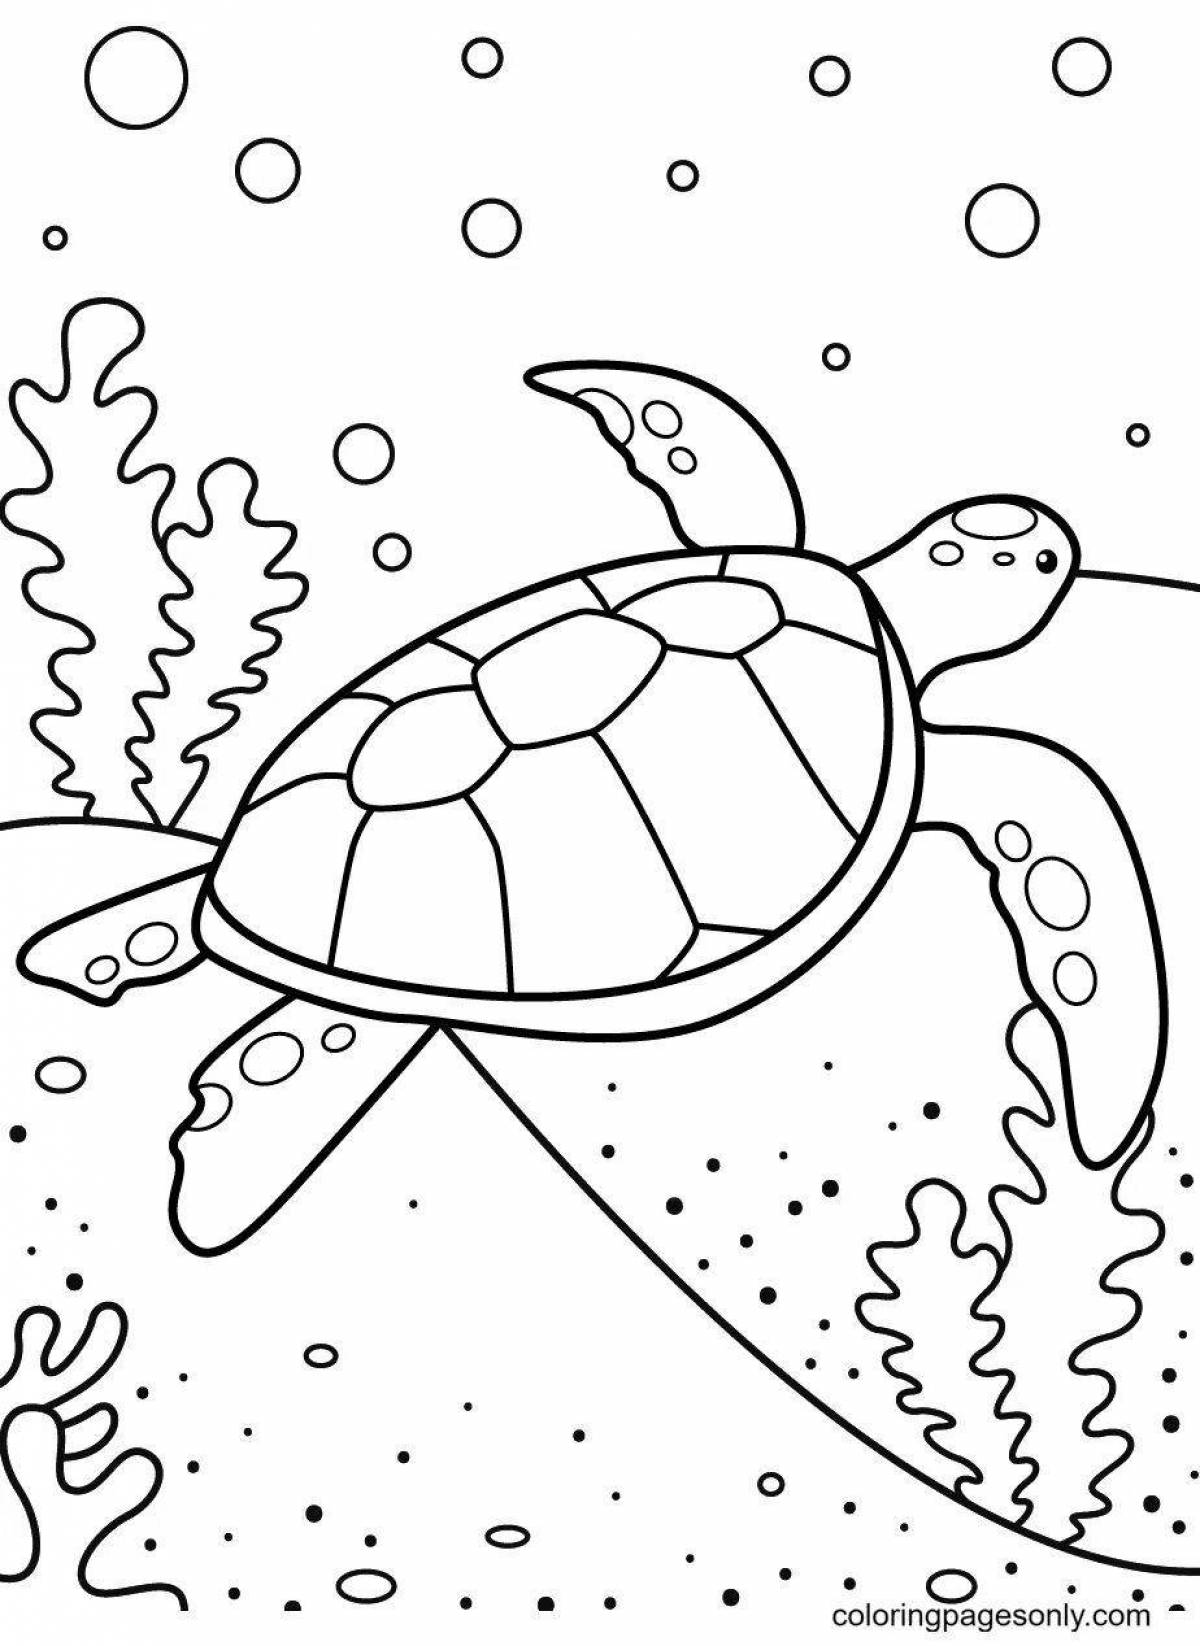 Gorgeous sea turtle coloring book for kids